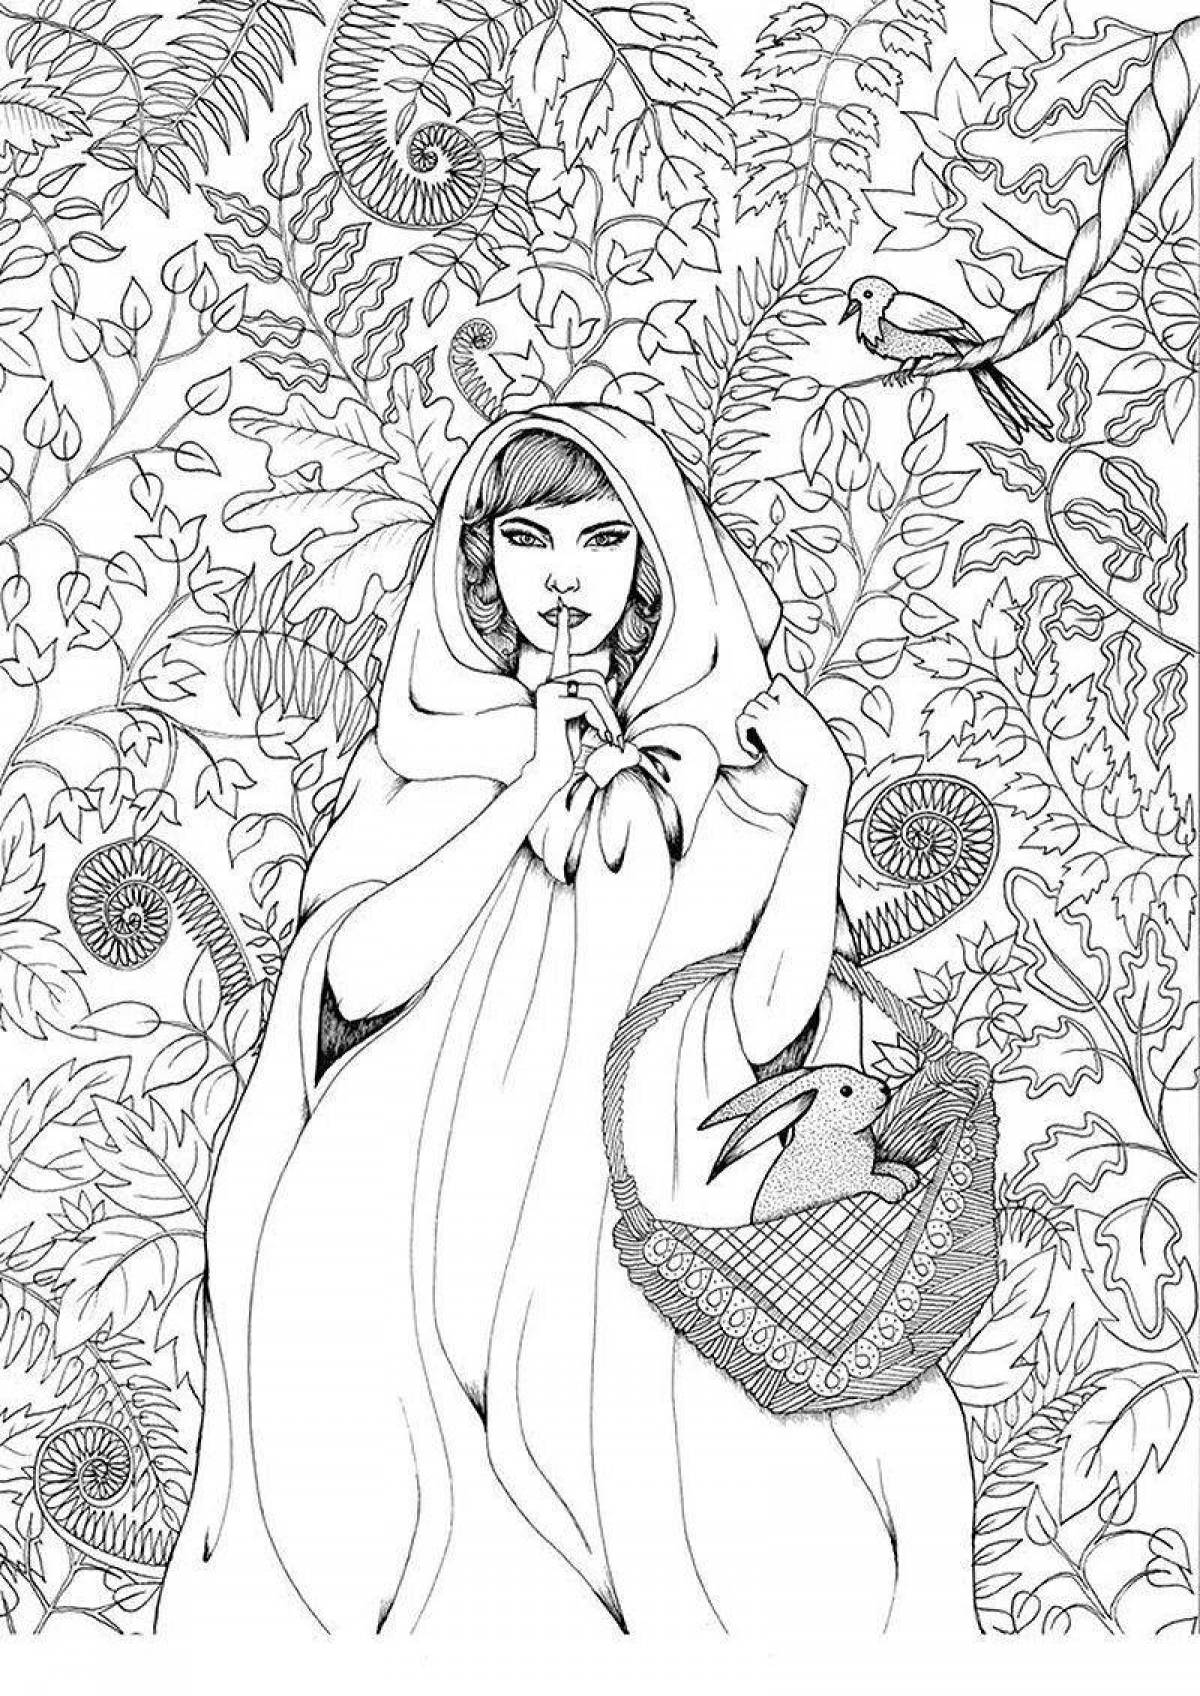 Exquisite coloring book for all adults